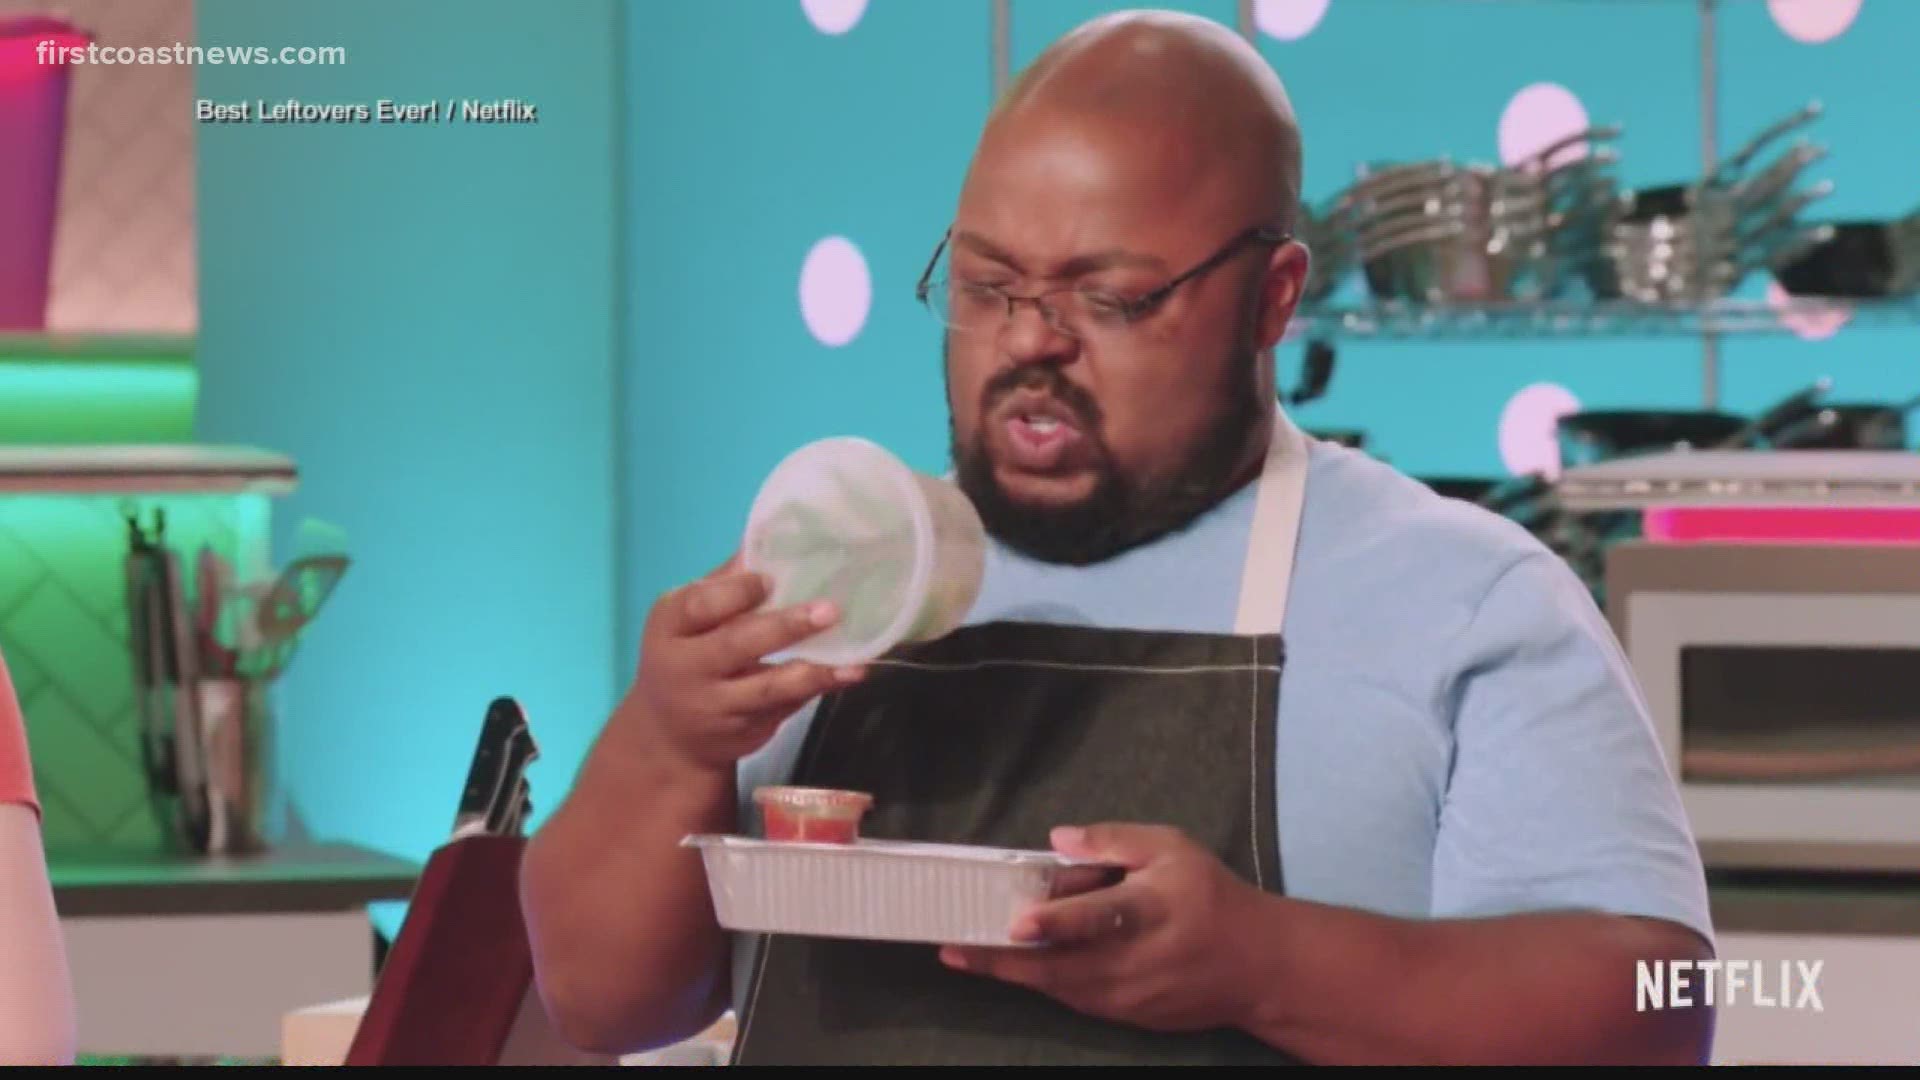 An interesting cooking show is hoping to inspire people to re-purpose fridge leftovers.